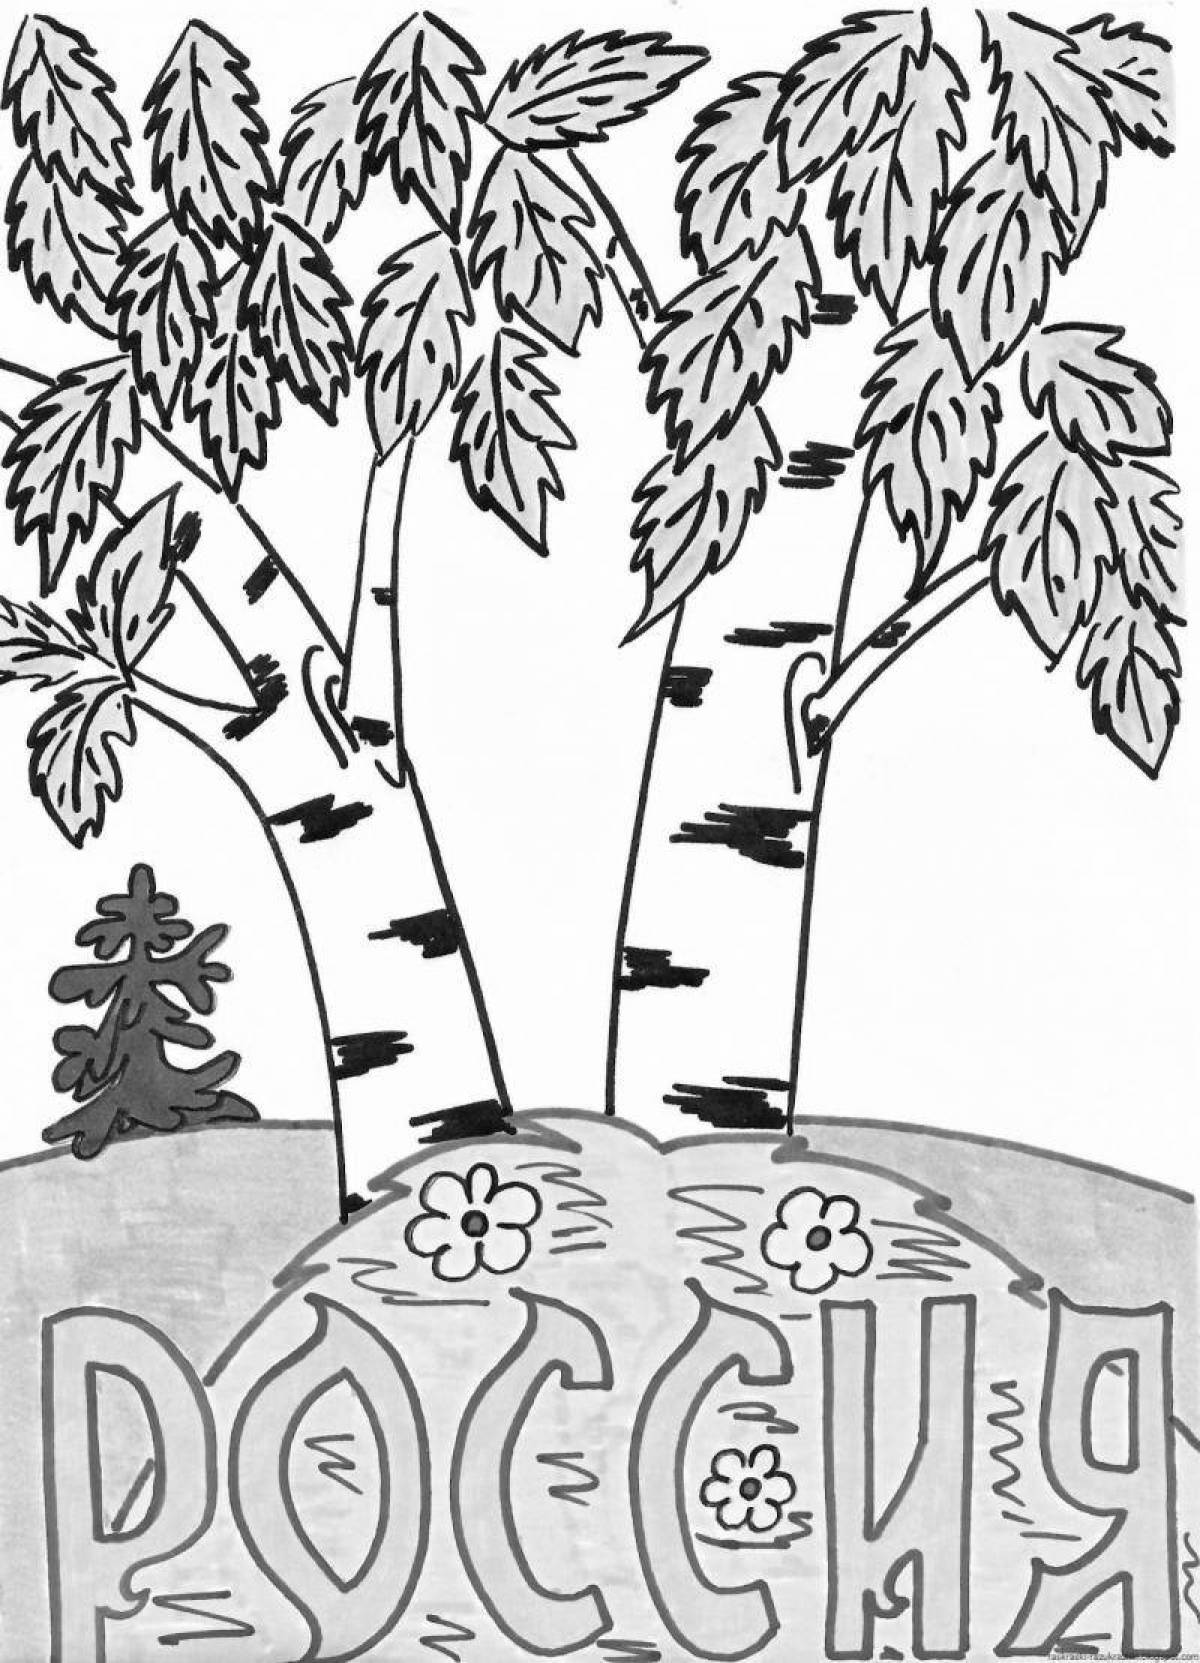 Exquisite birch coloring book for kids